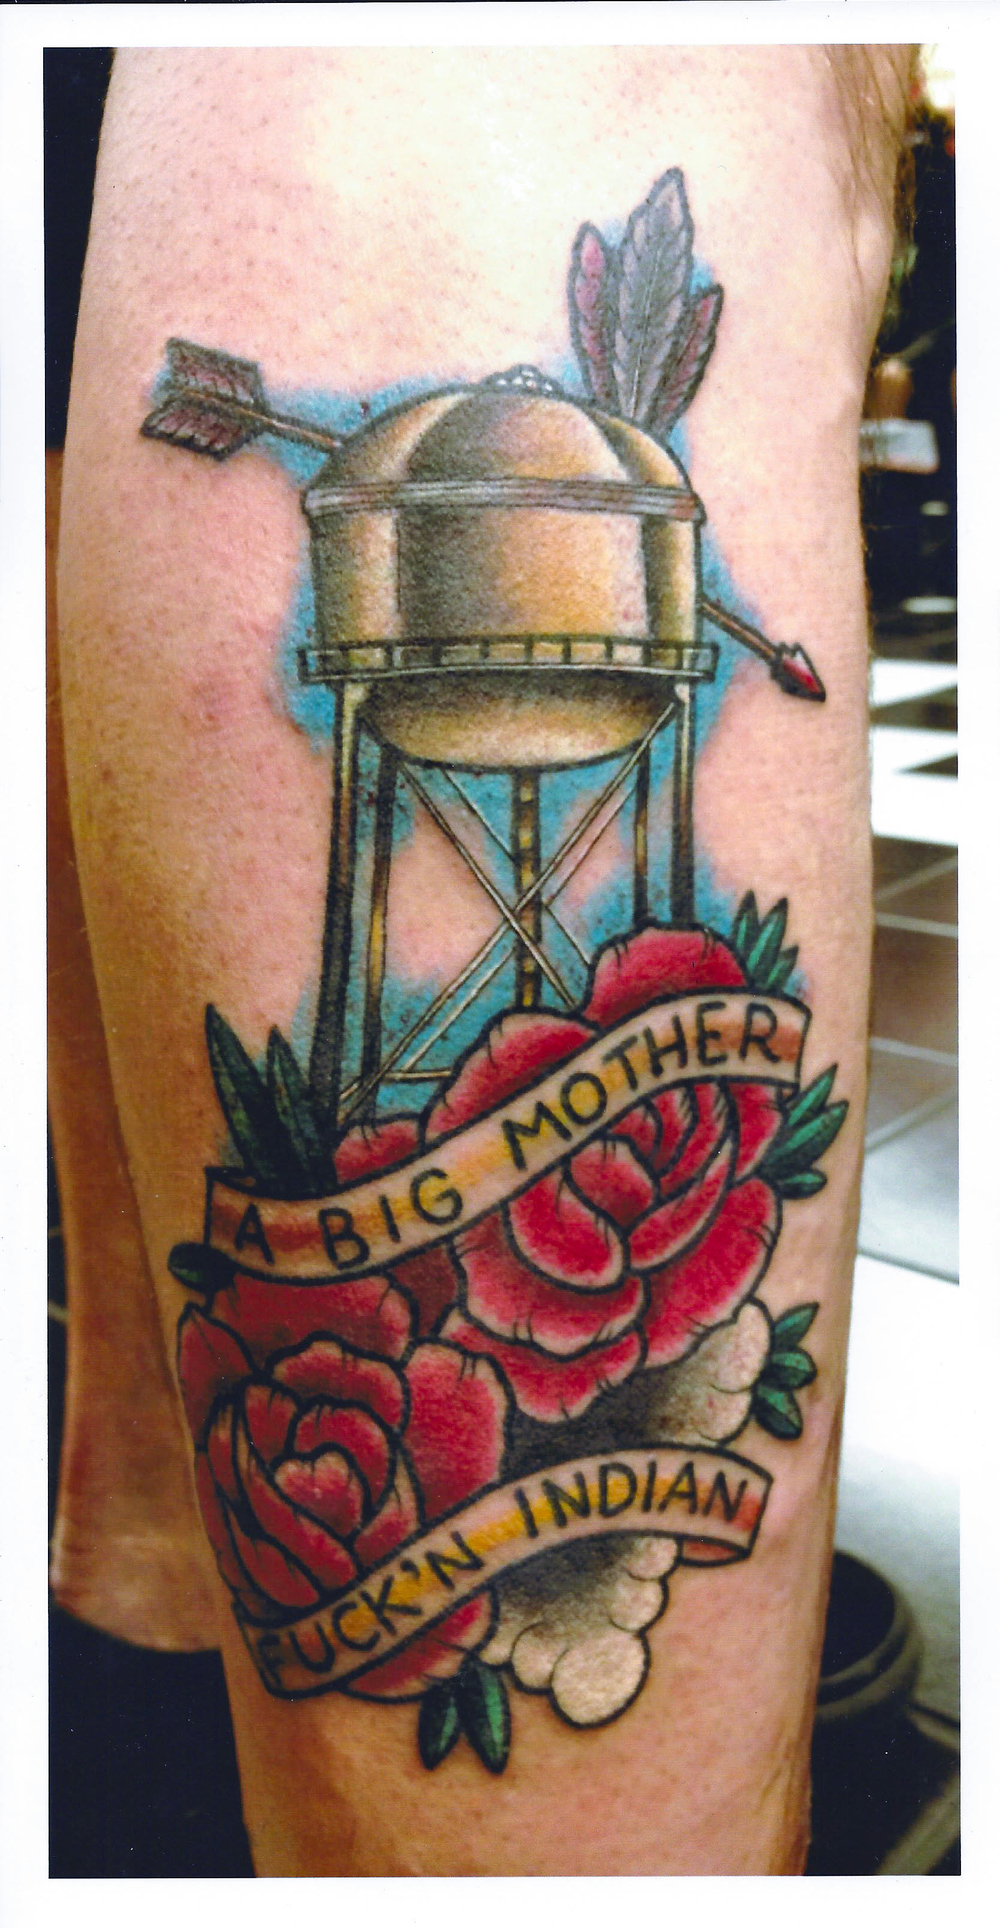 Chris McQueer Why I got the Garthamlock and Craigend water towers tattooed  on my stomach  Glasgow Times